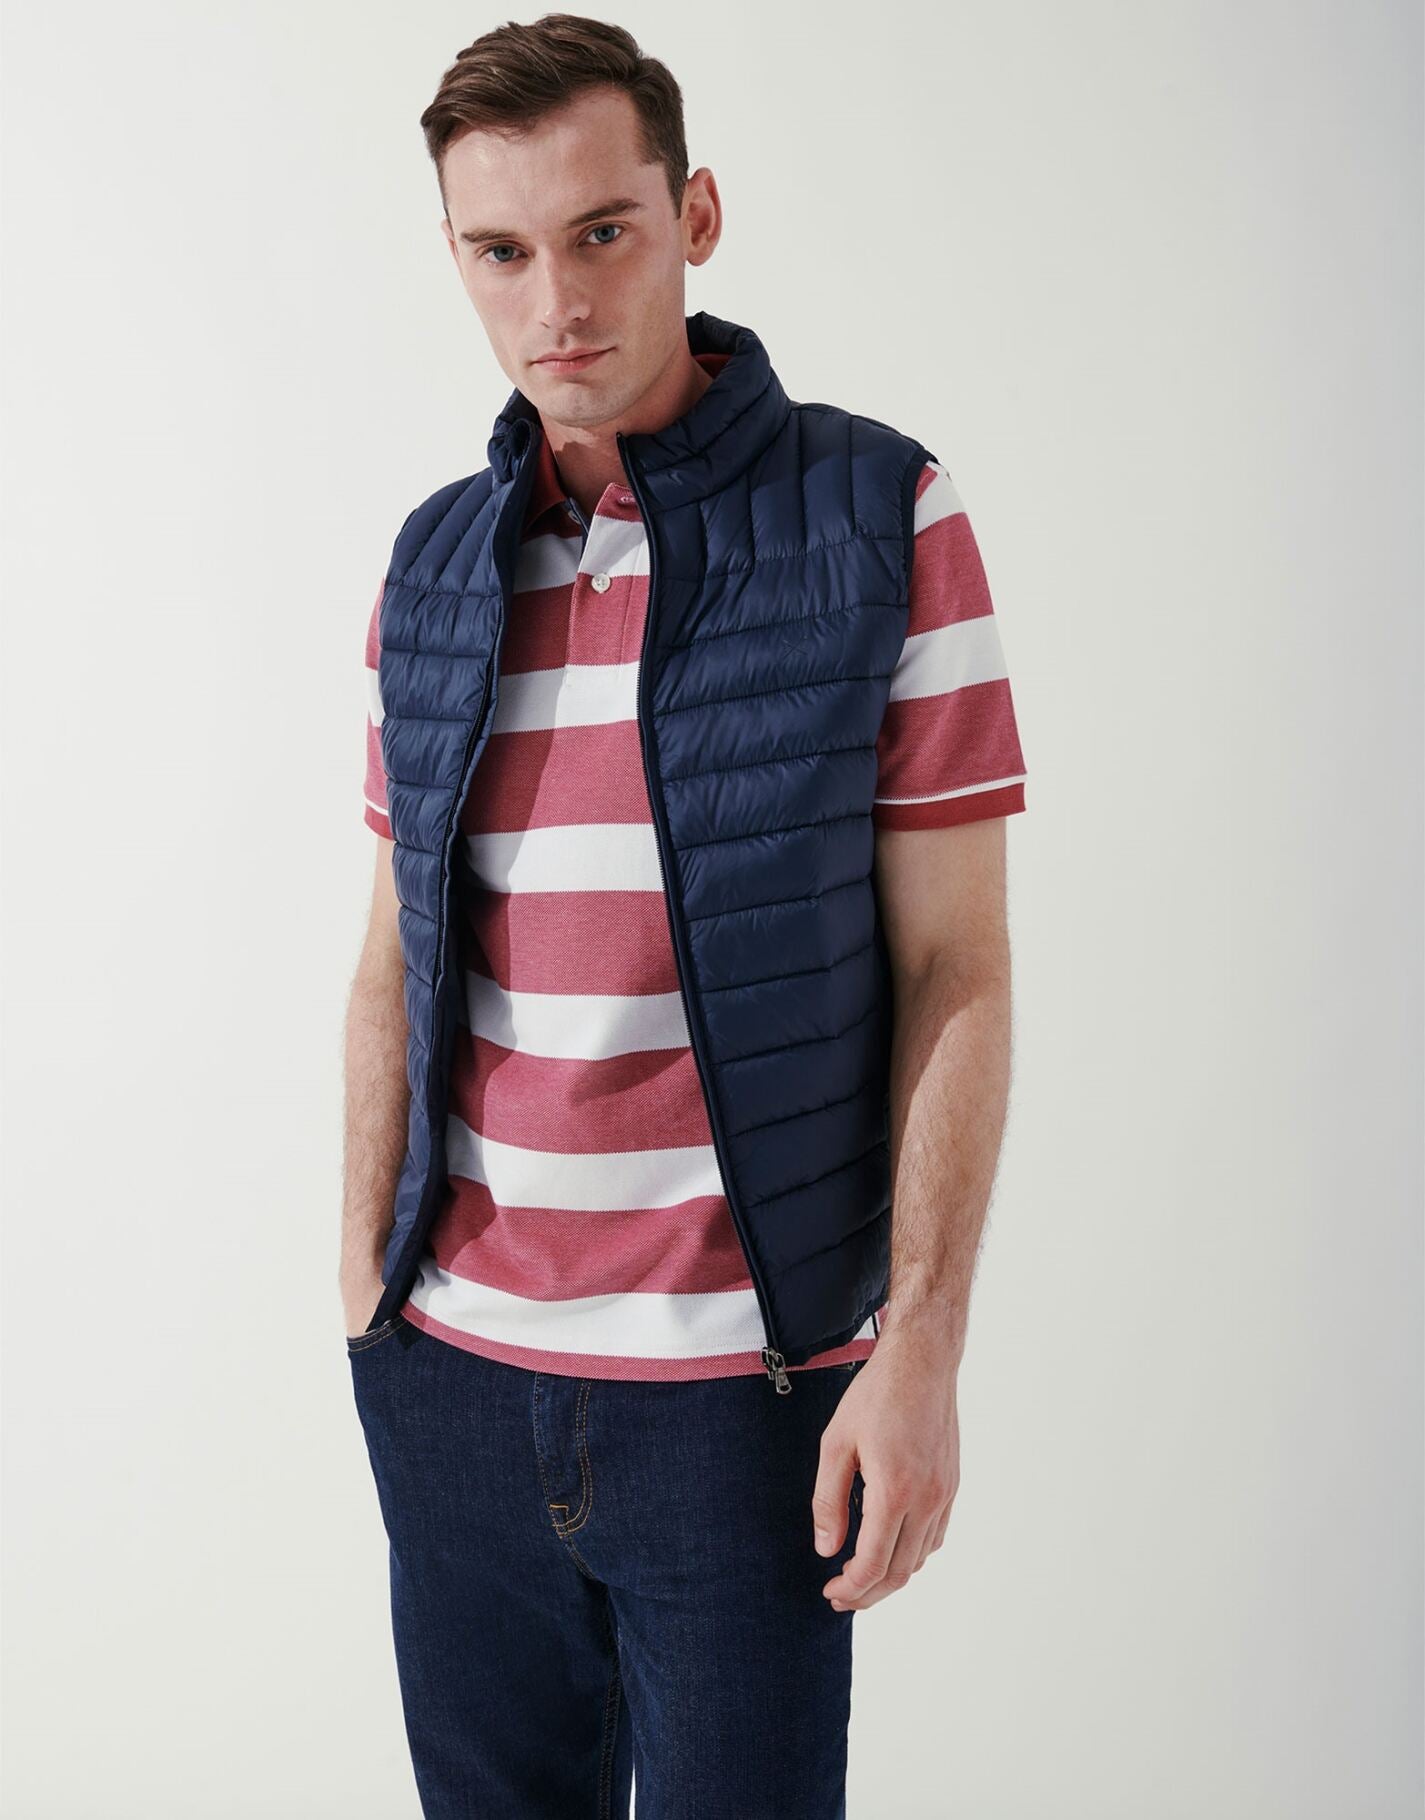 Crew Clothing Lowther Gilet